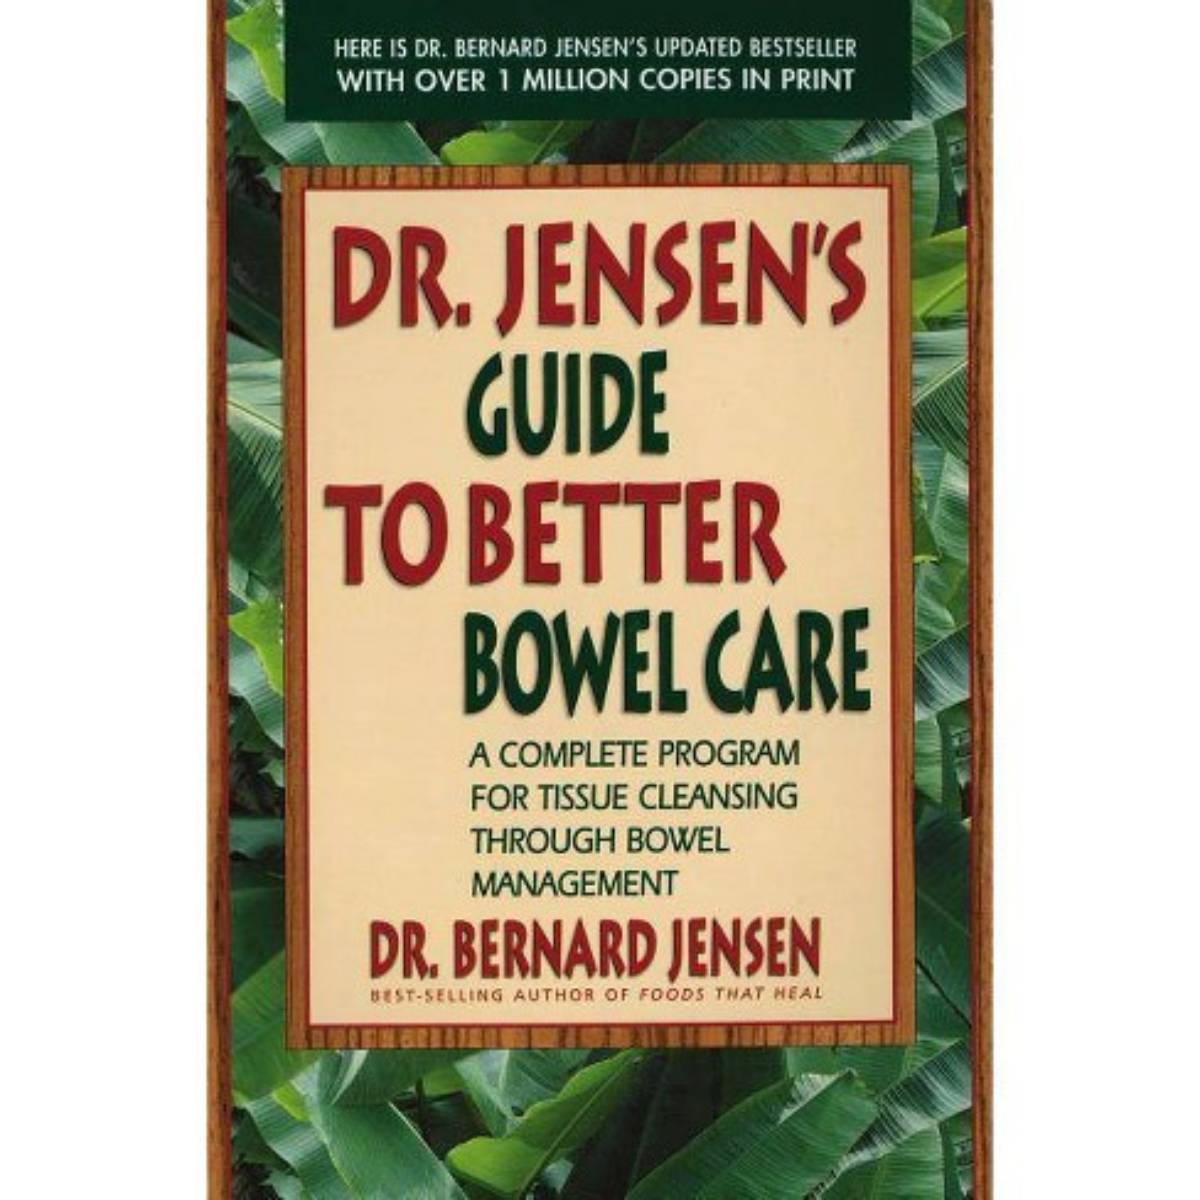 Dr. Jensen’s Guide to Better Bowel Care